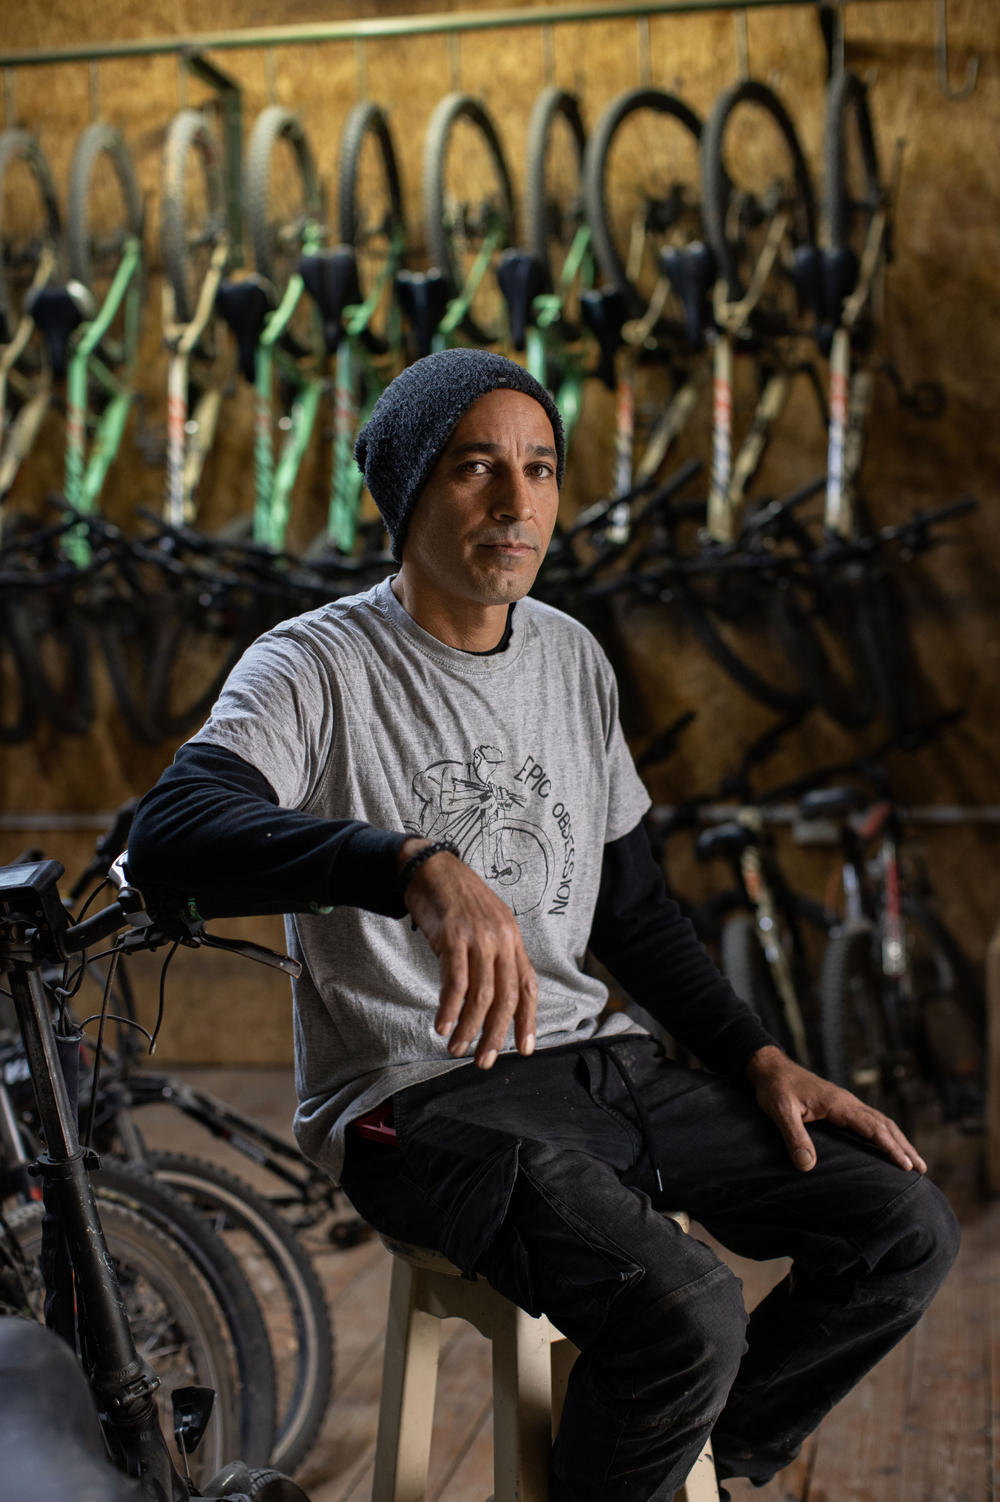 Raanan Momika, who runs a cycling tourism business, sits for a portrait in his shop at Lehavot Habashan, a kibbutz in northern Israel near the border with Lebanon, on Nov. 28.